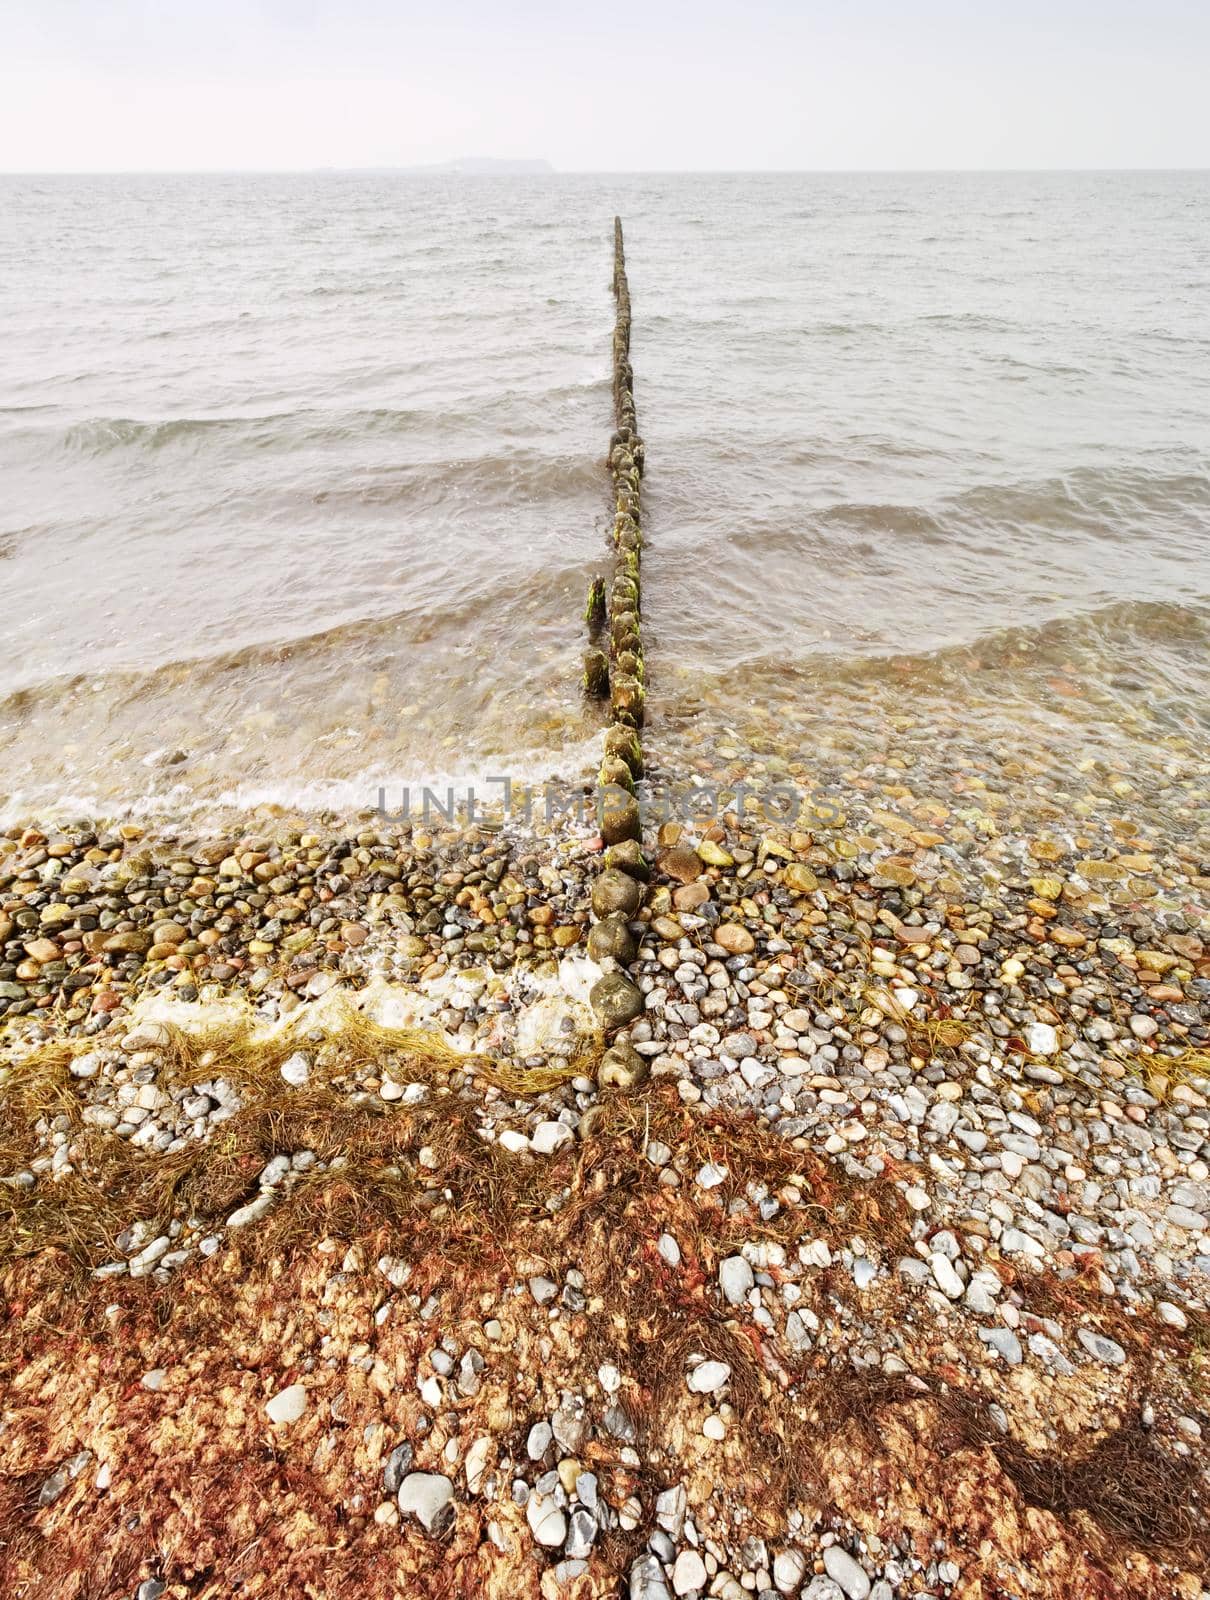 Wooden breakwater in wavy Baltic Sea. Evening at smooth wavy sea. Low clouds by rdonar2